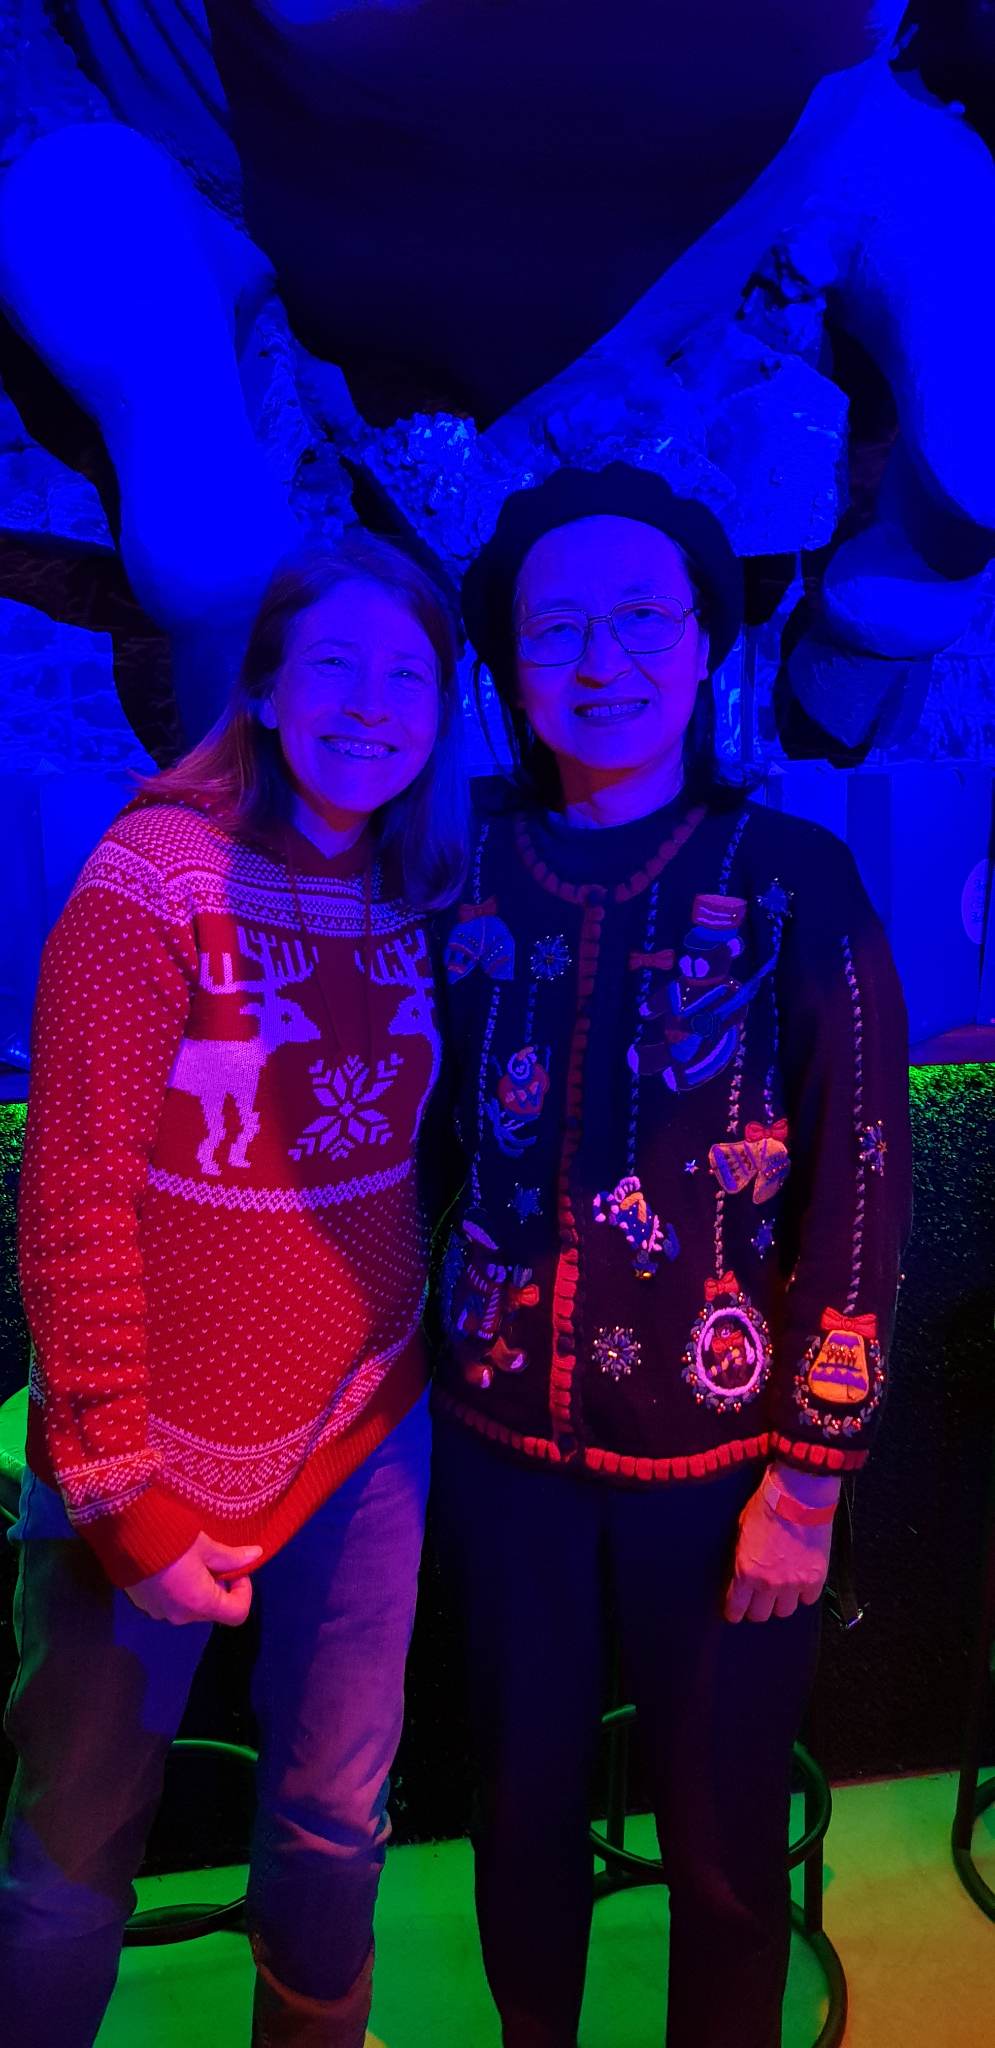 Two lab members smile for the camera while wearing holiday sweaters